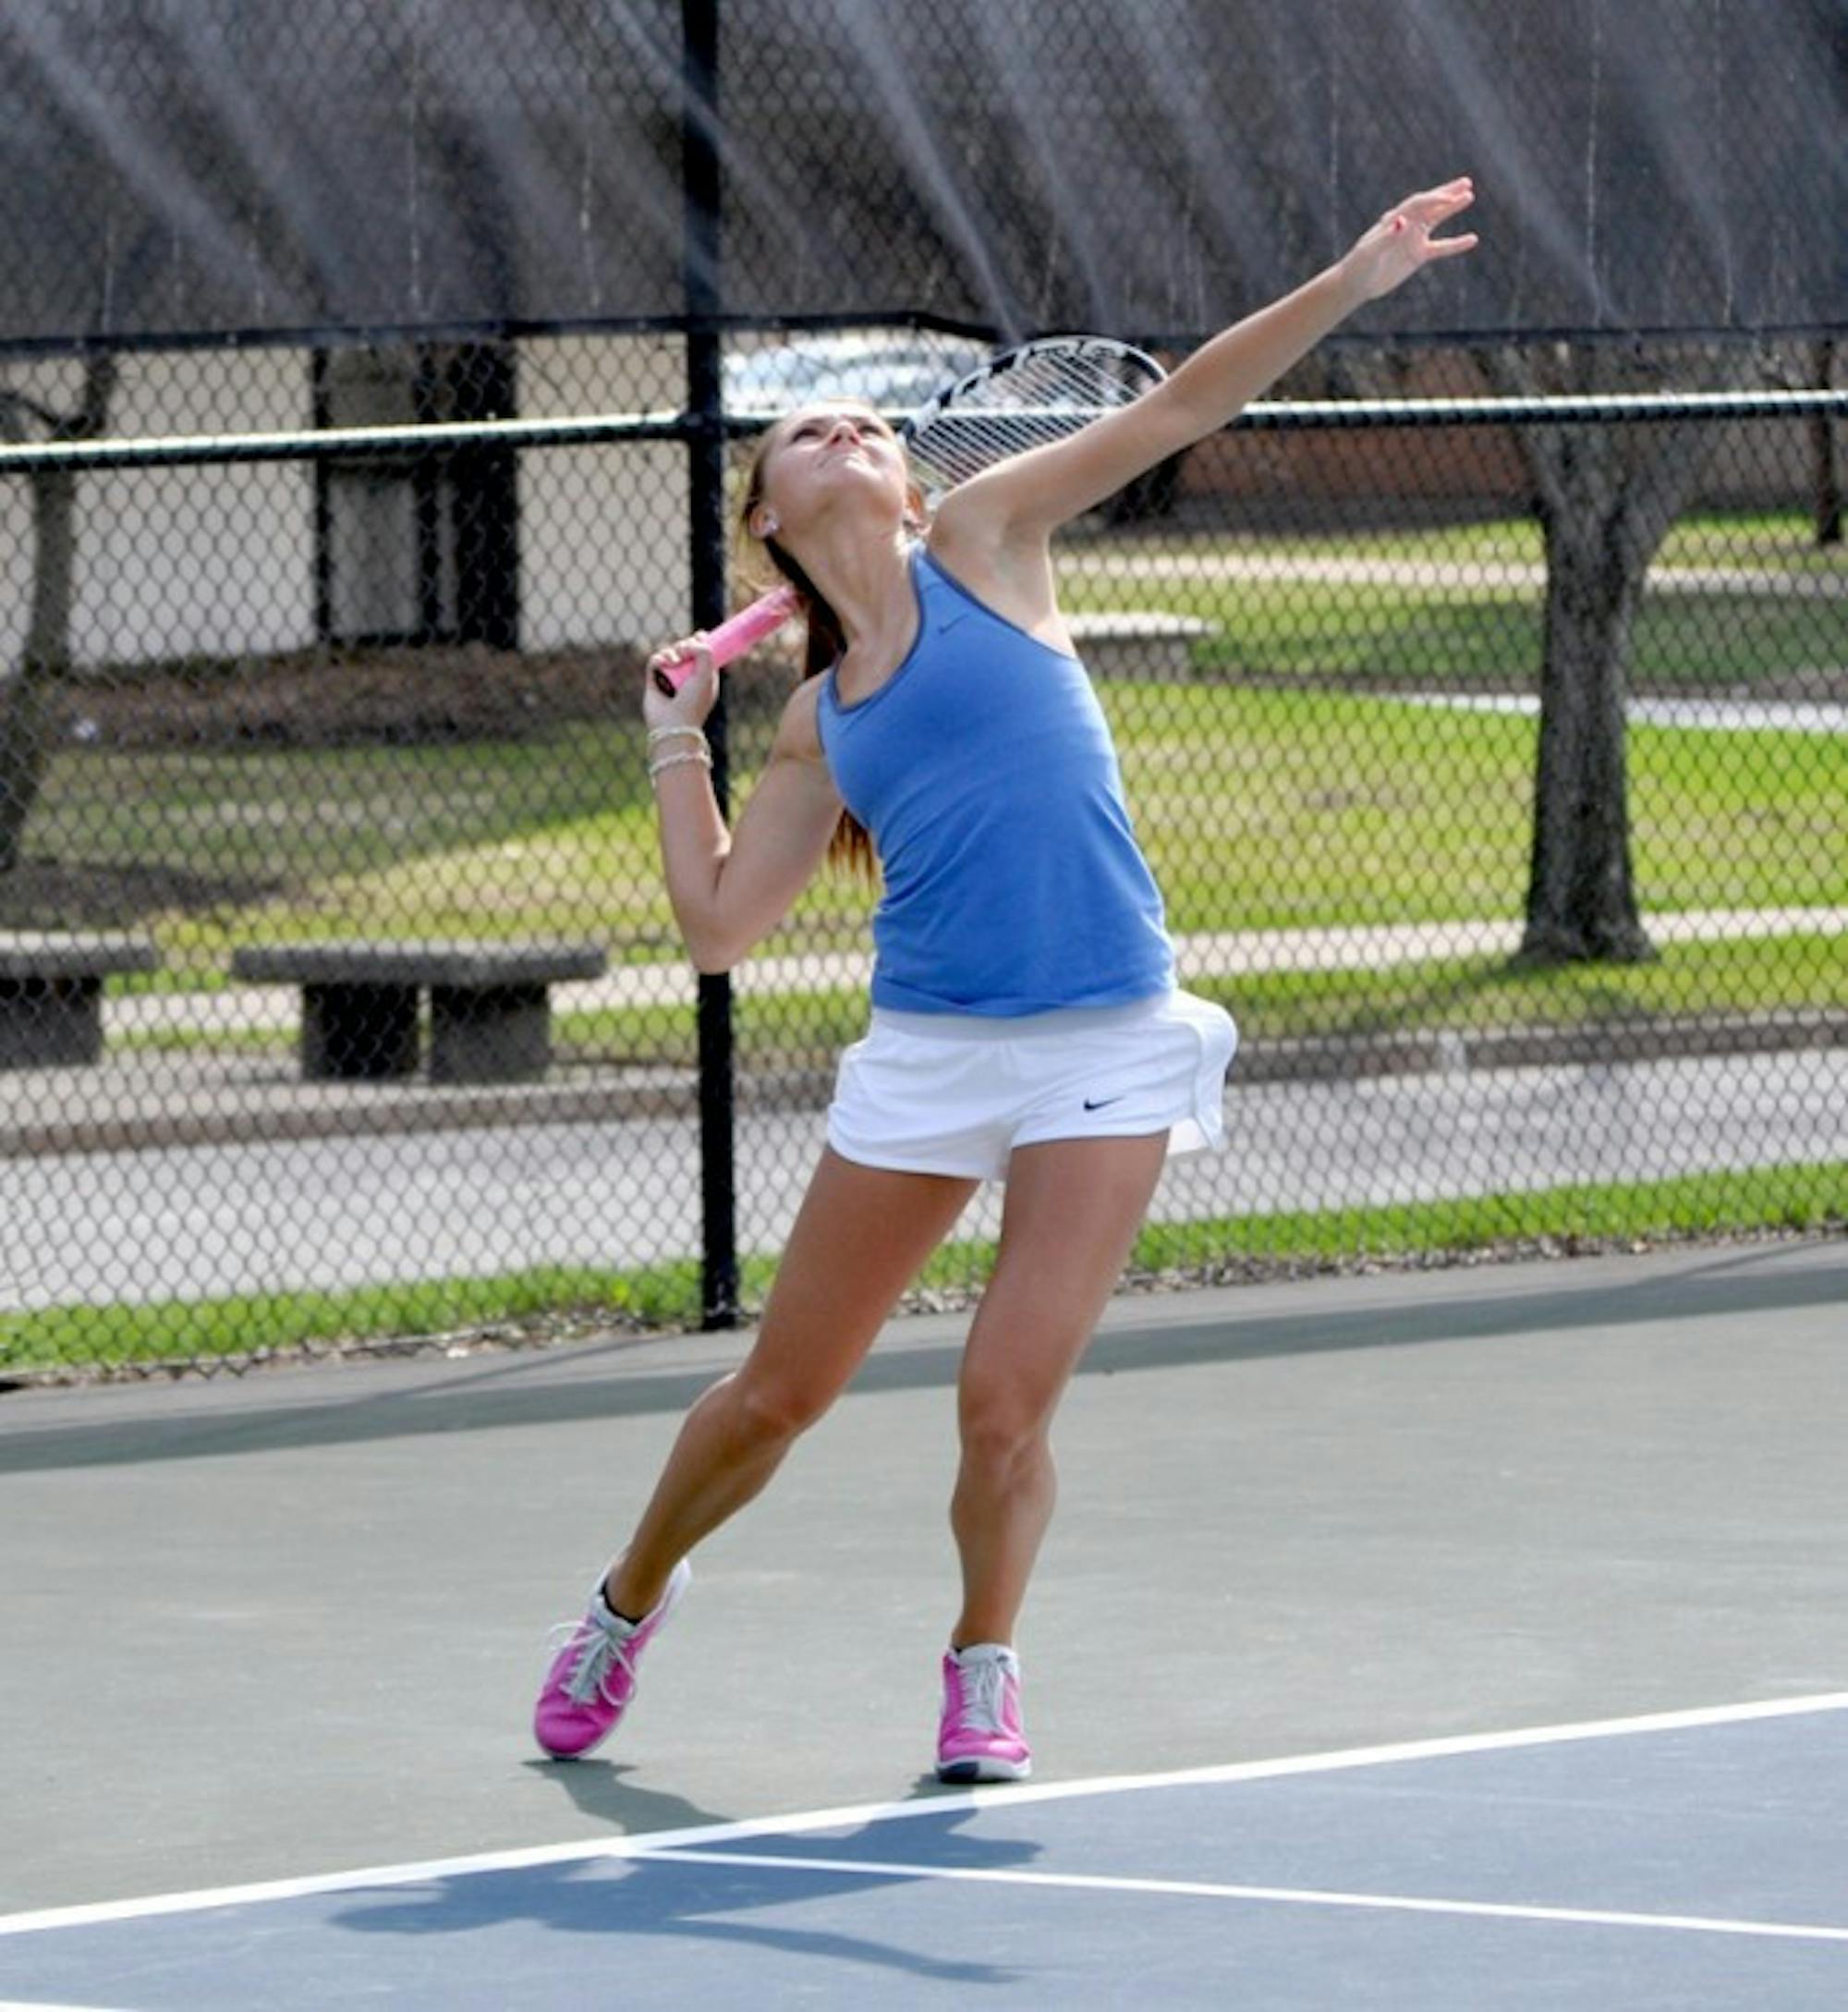 Saint Mary's junior Kayle Sexton unleashes a serve during the Belles' 8-1 loss to Hope on April 17.